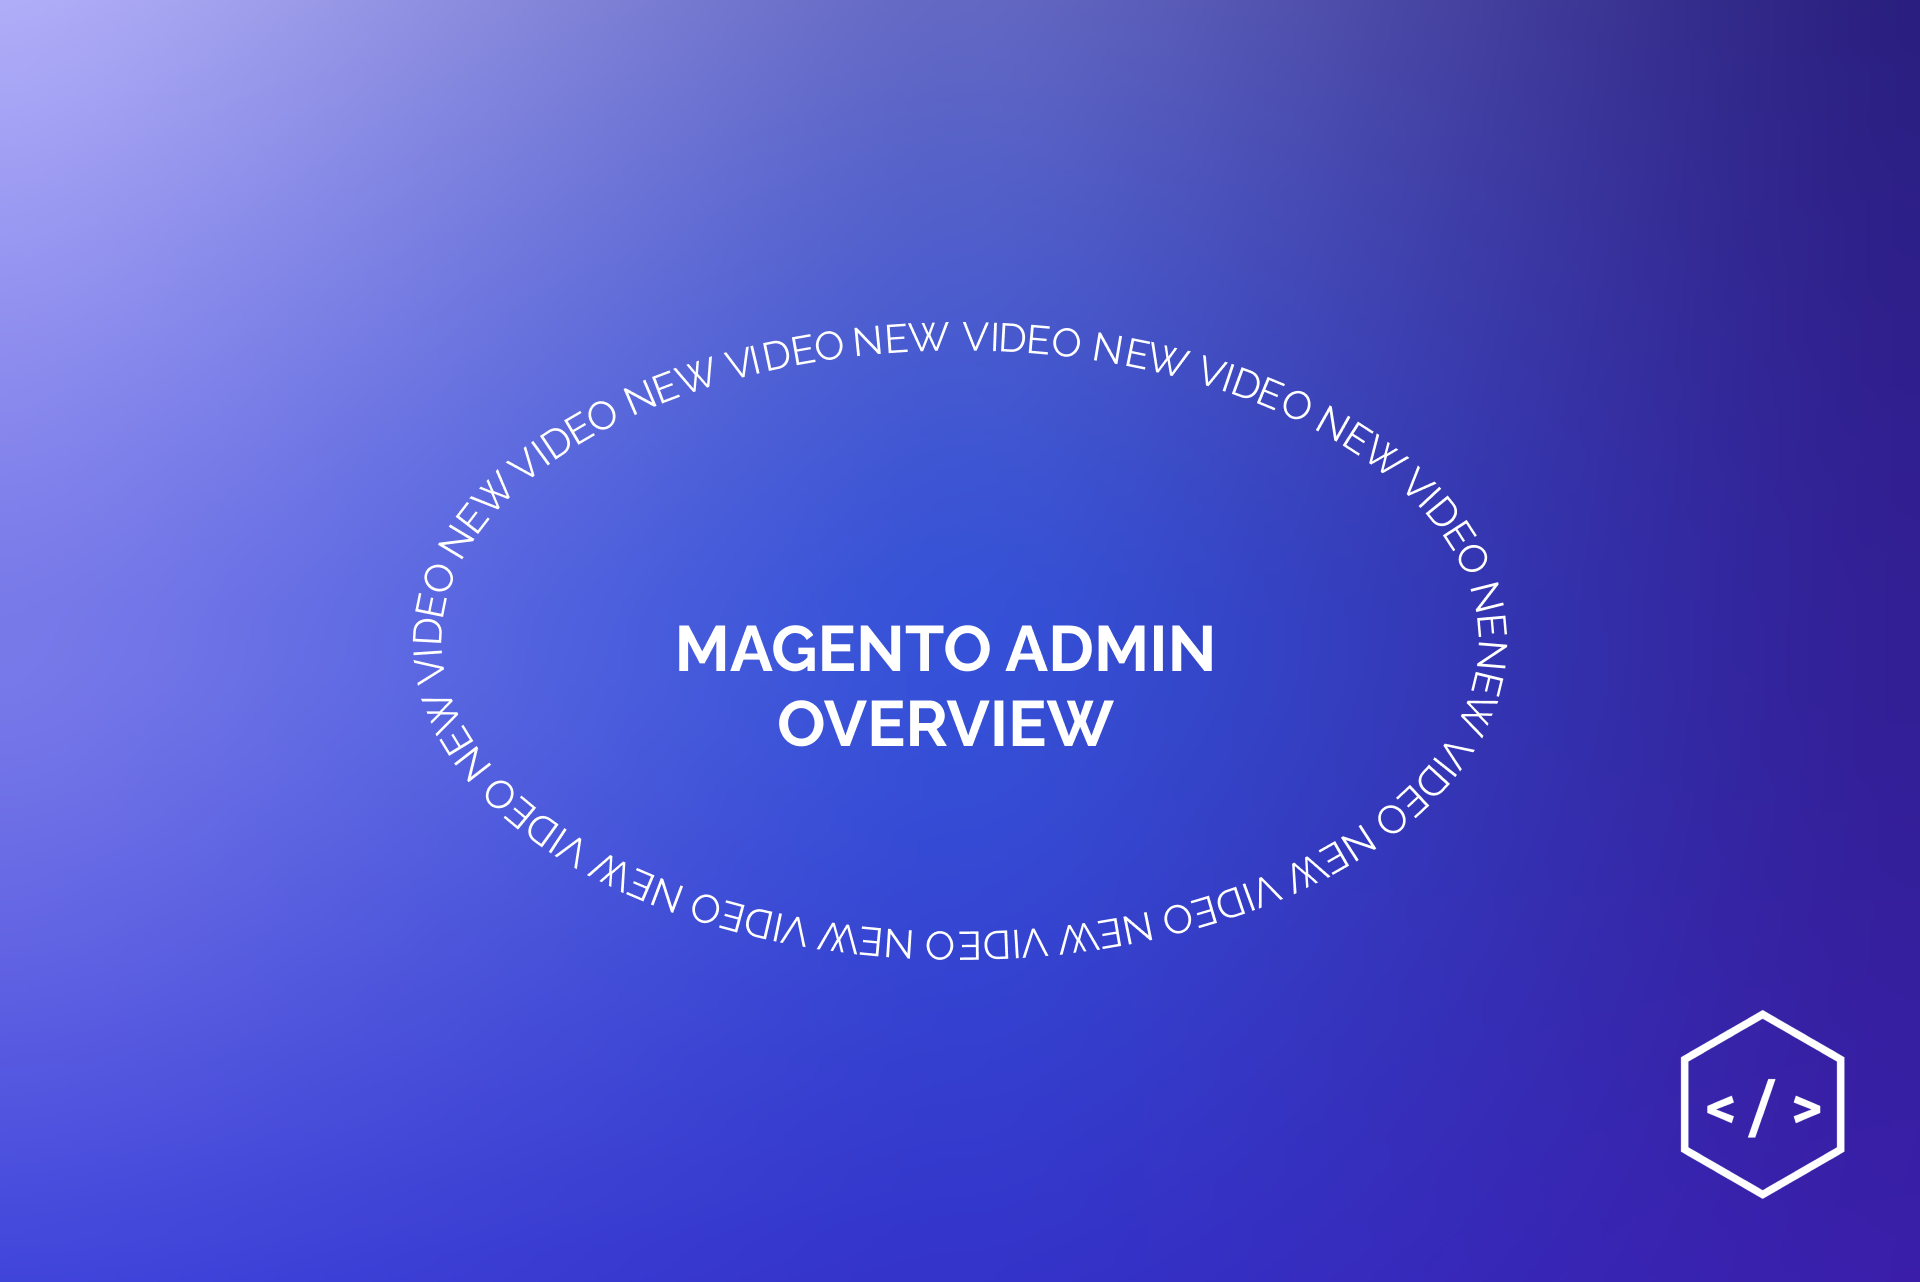 How to use Magento Admin Panel?